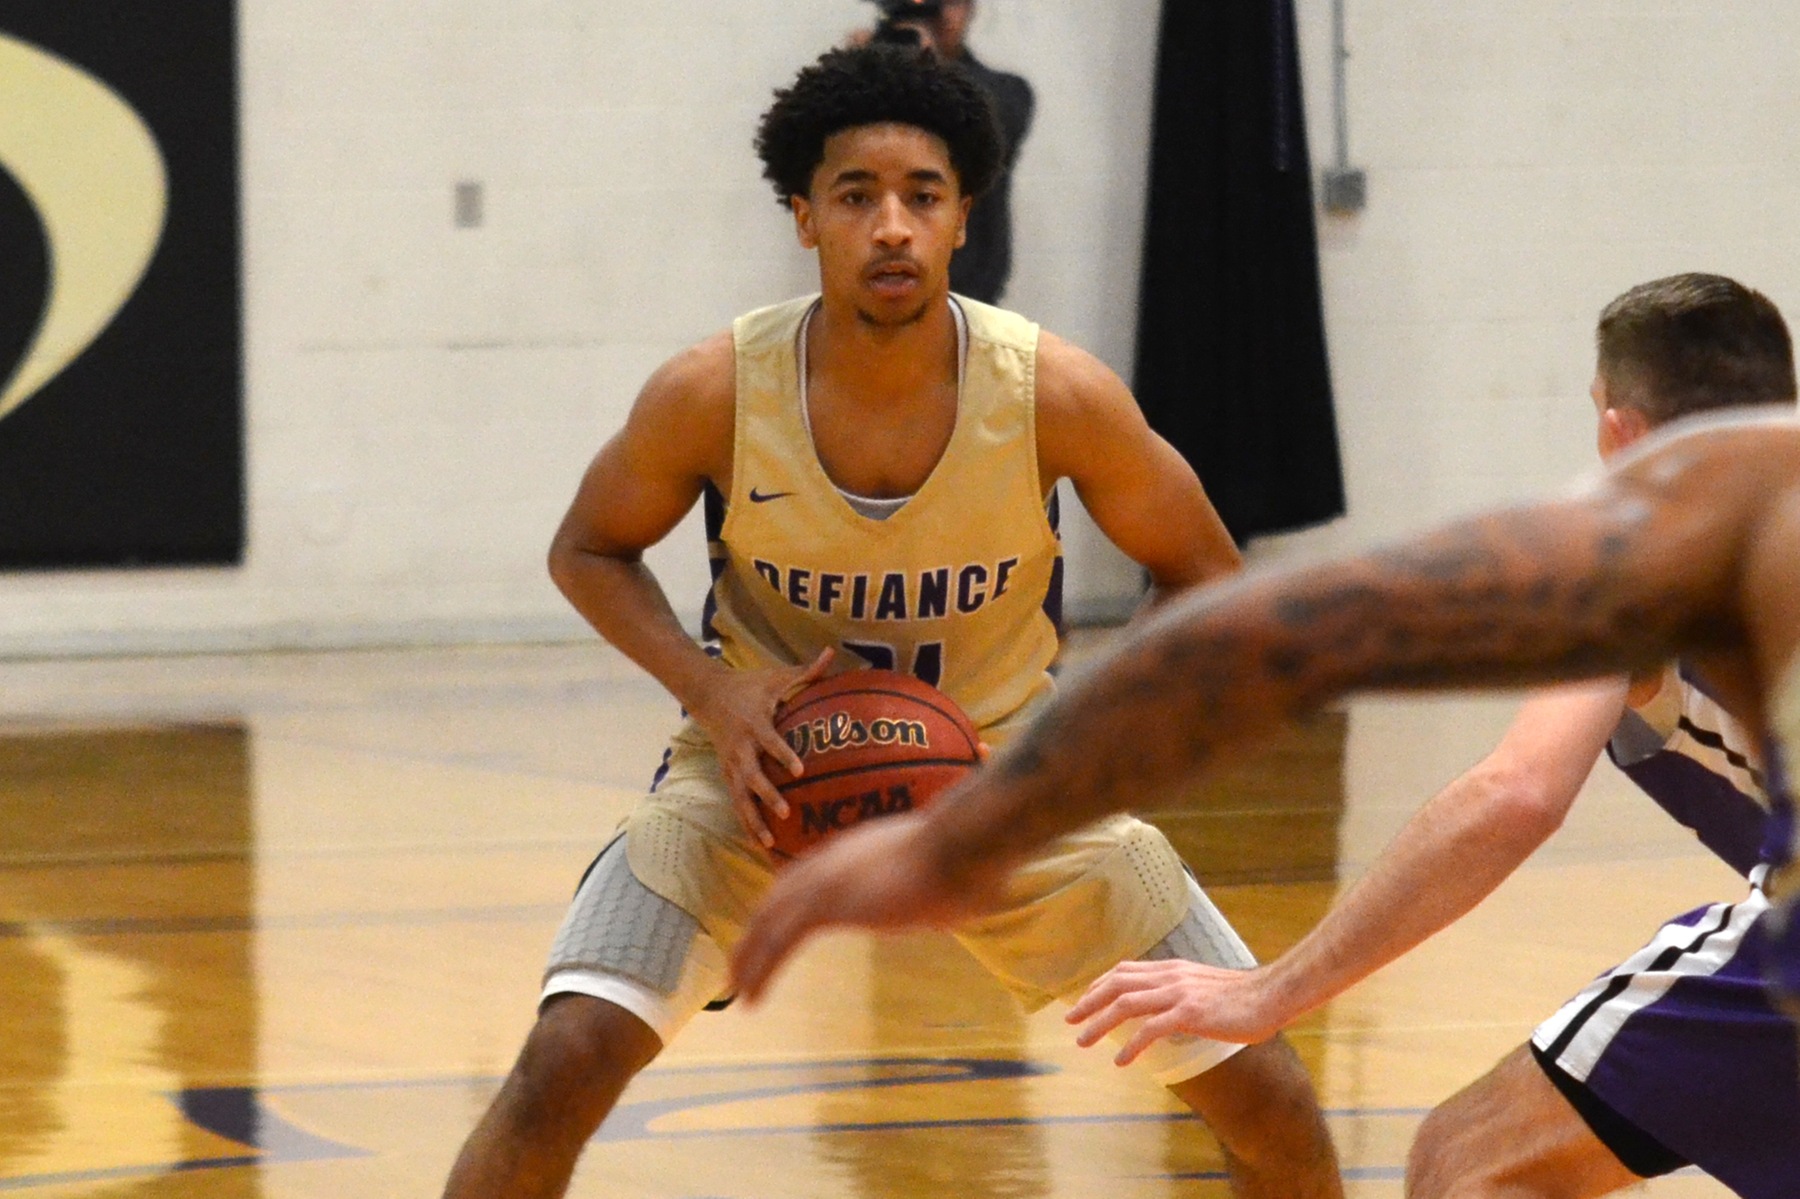 Men’s basketball suffers HCAC loss to Transy